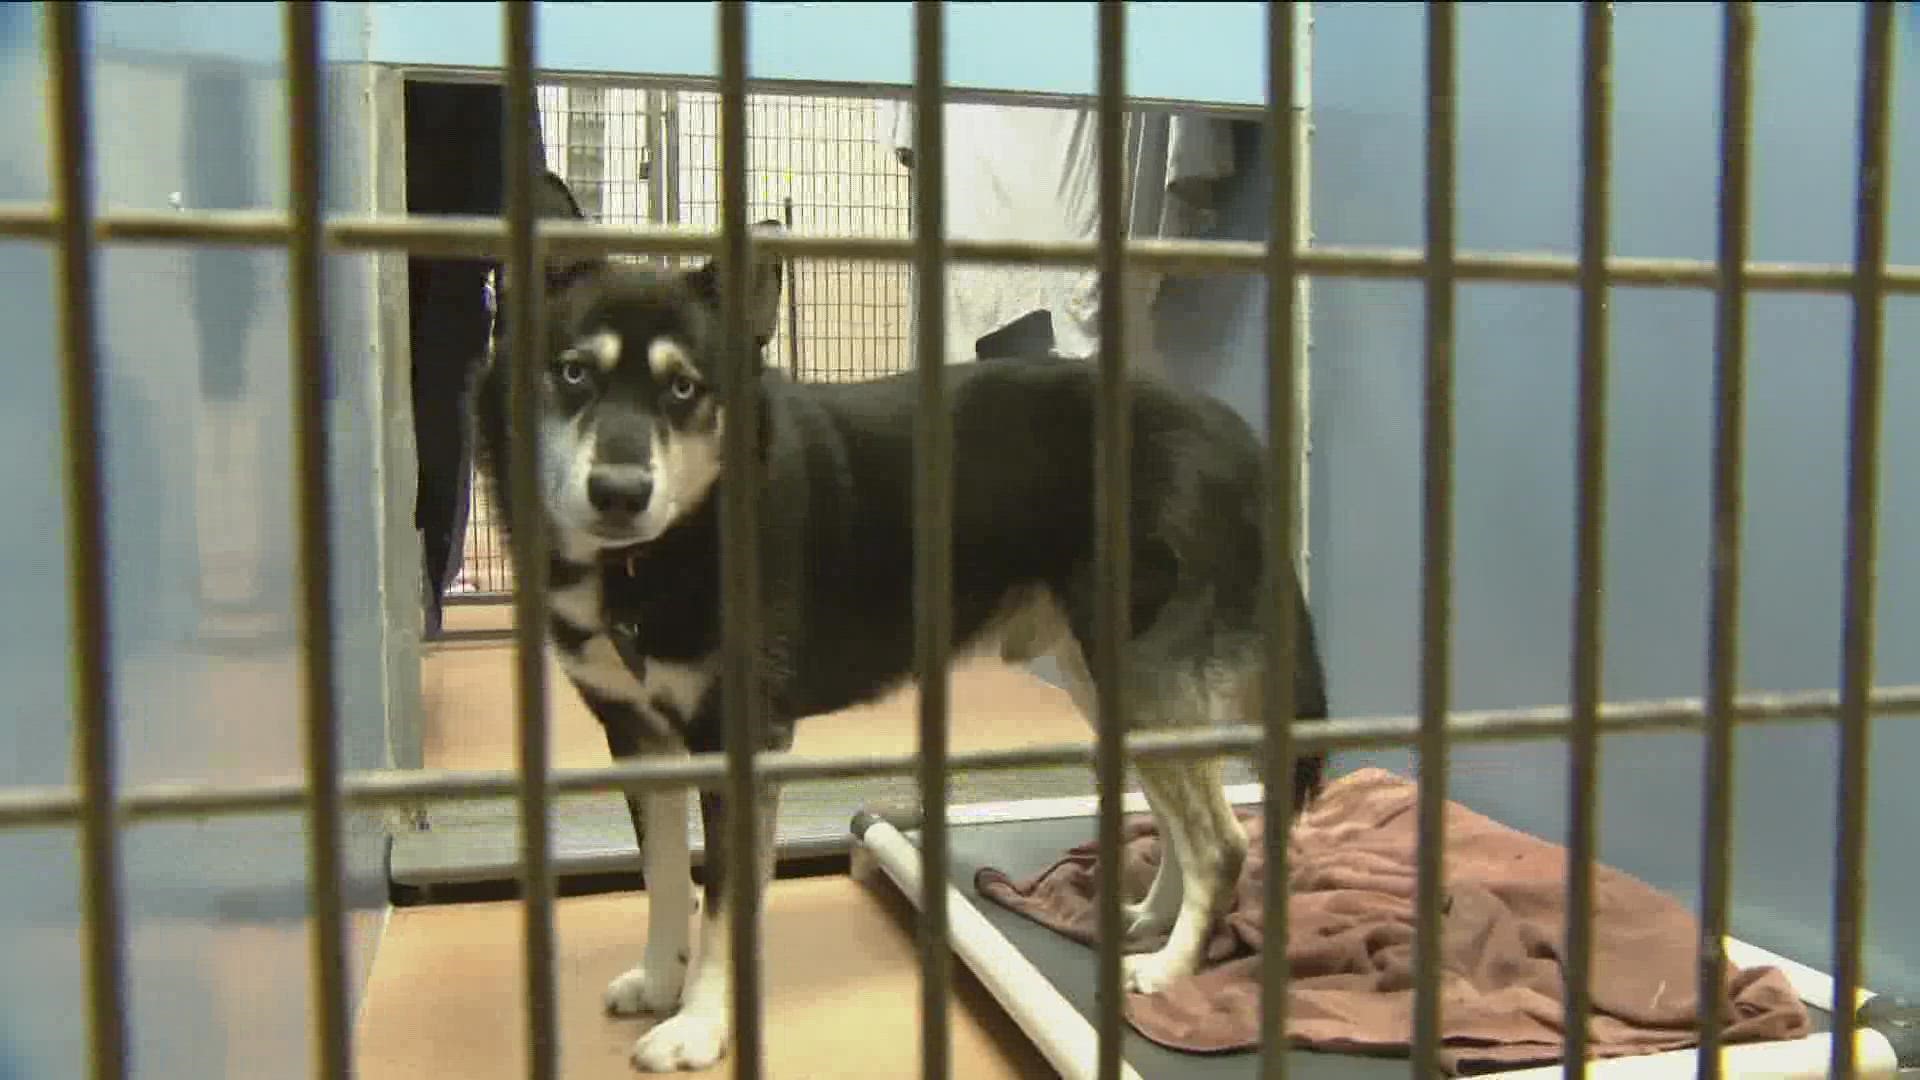 The animal shelter is nearly 200 dogs overcapacity after taking in more than 75 strays since New Year's Eve.